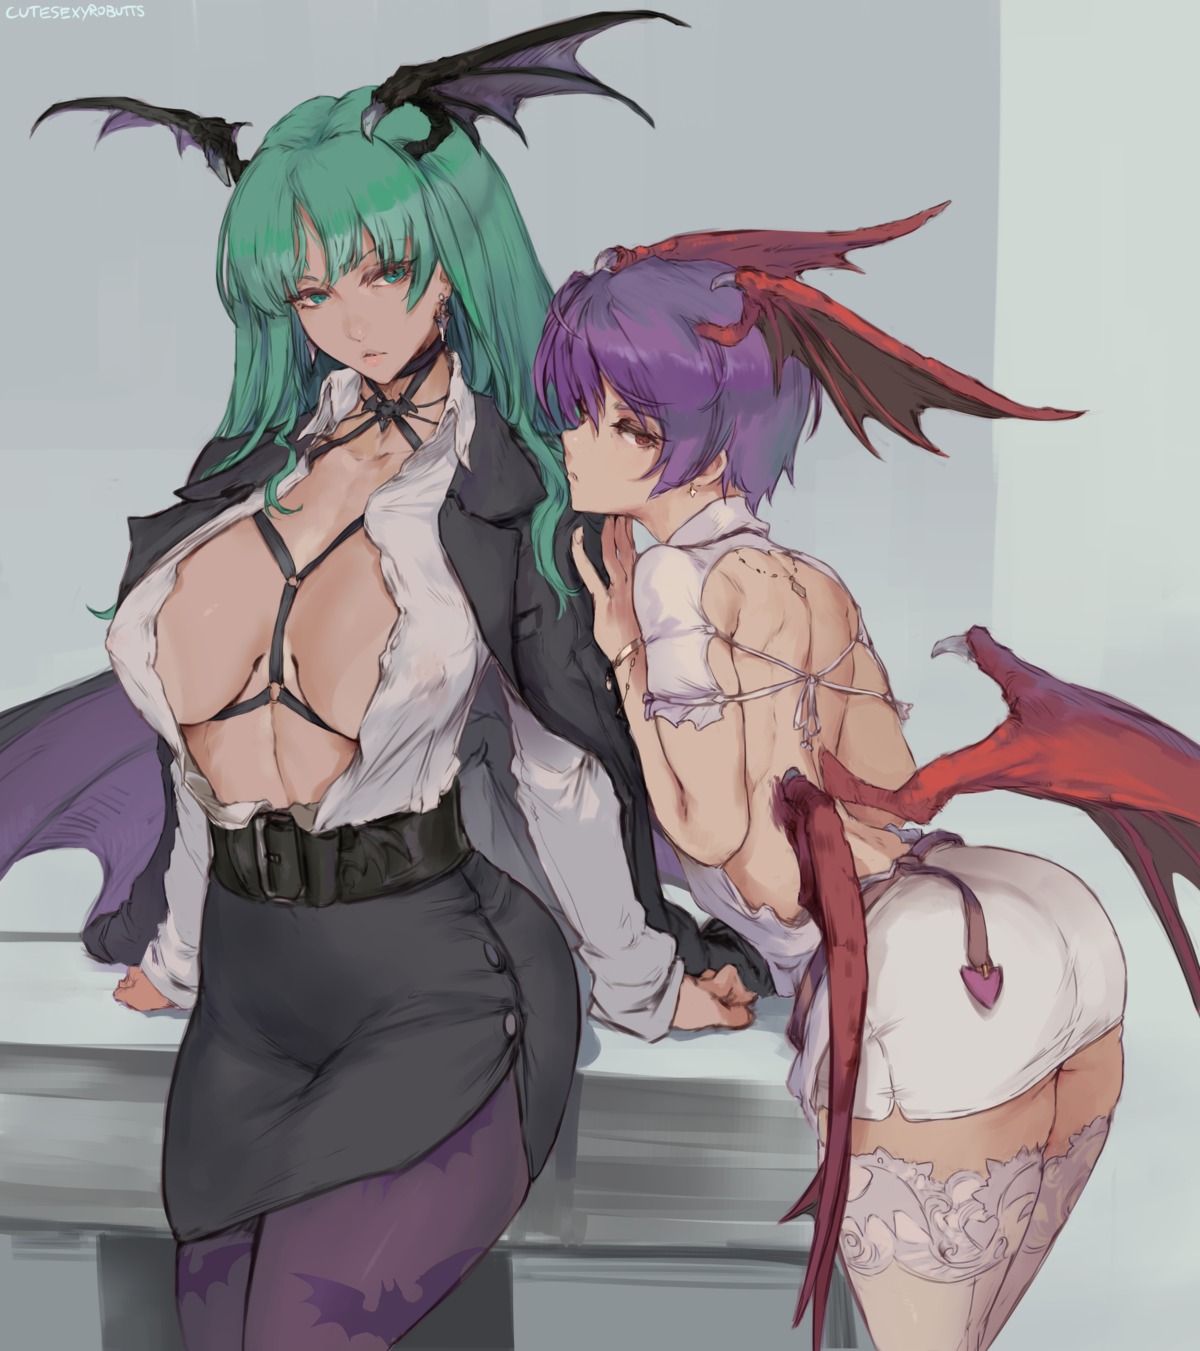 areola ass business_suit cutesexyrobutts dark_stalkers erect_nipples lilith_aensland morrigan_aensland no_bra open_shirt pantyhose see_through thighhighs wings